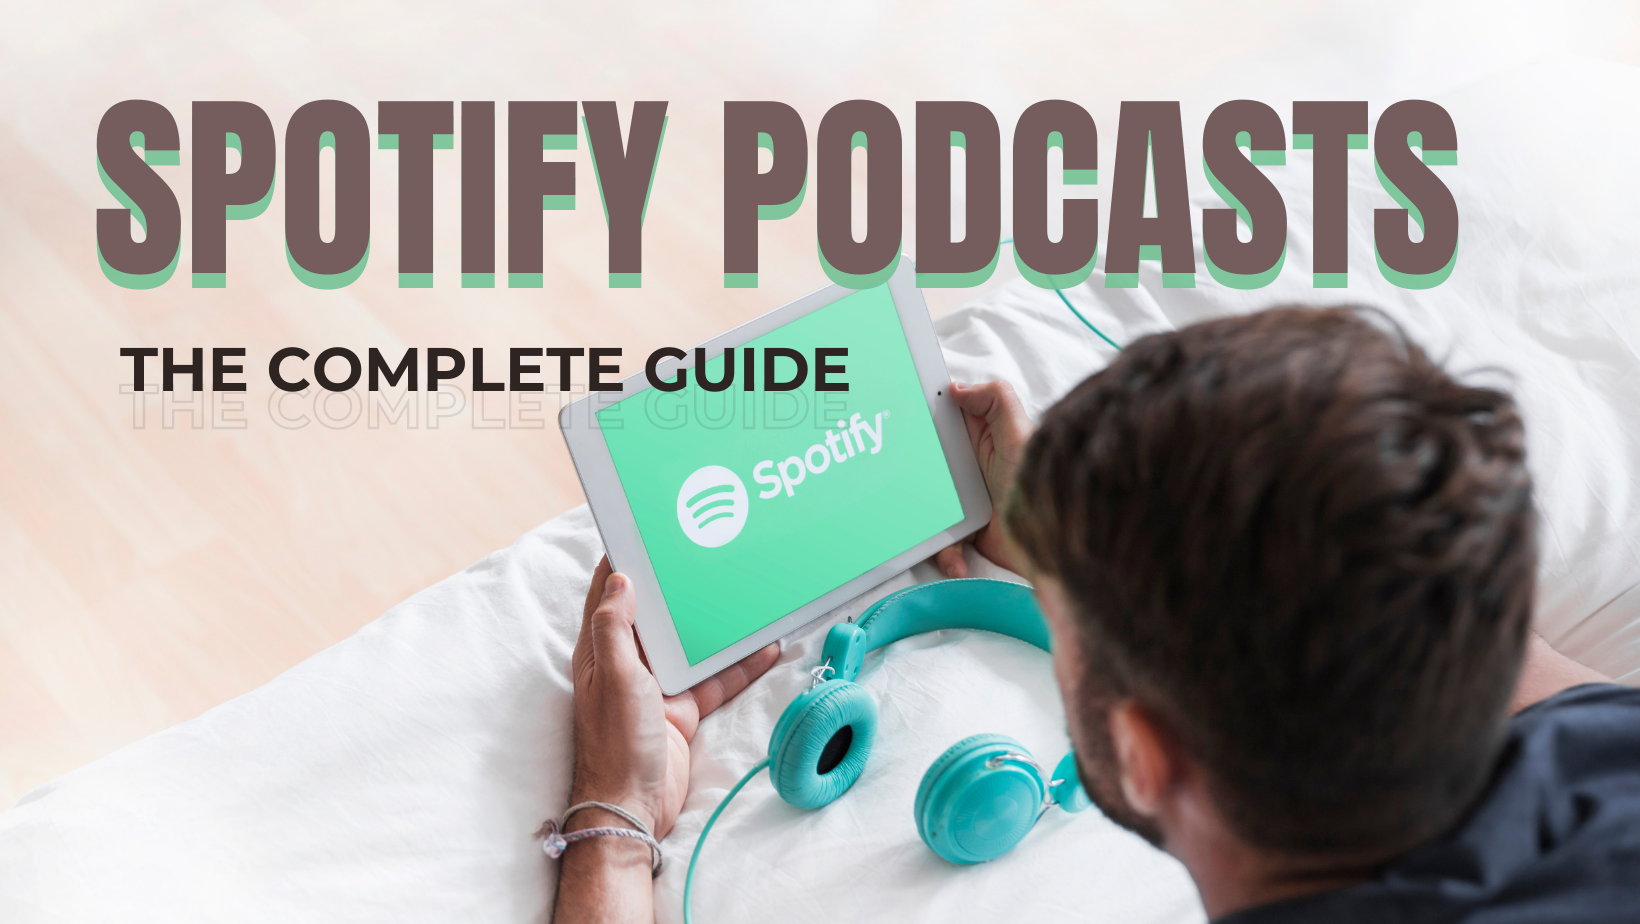 Spotify Podcasts – The Complete Guide